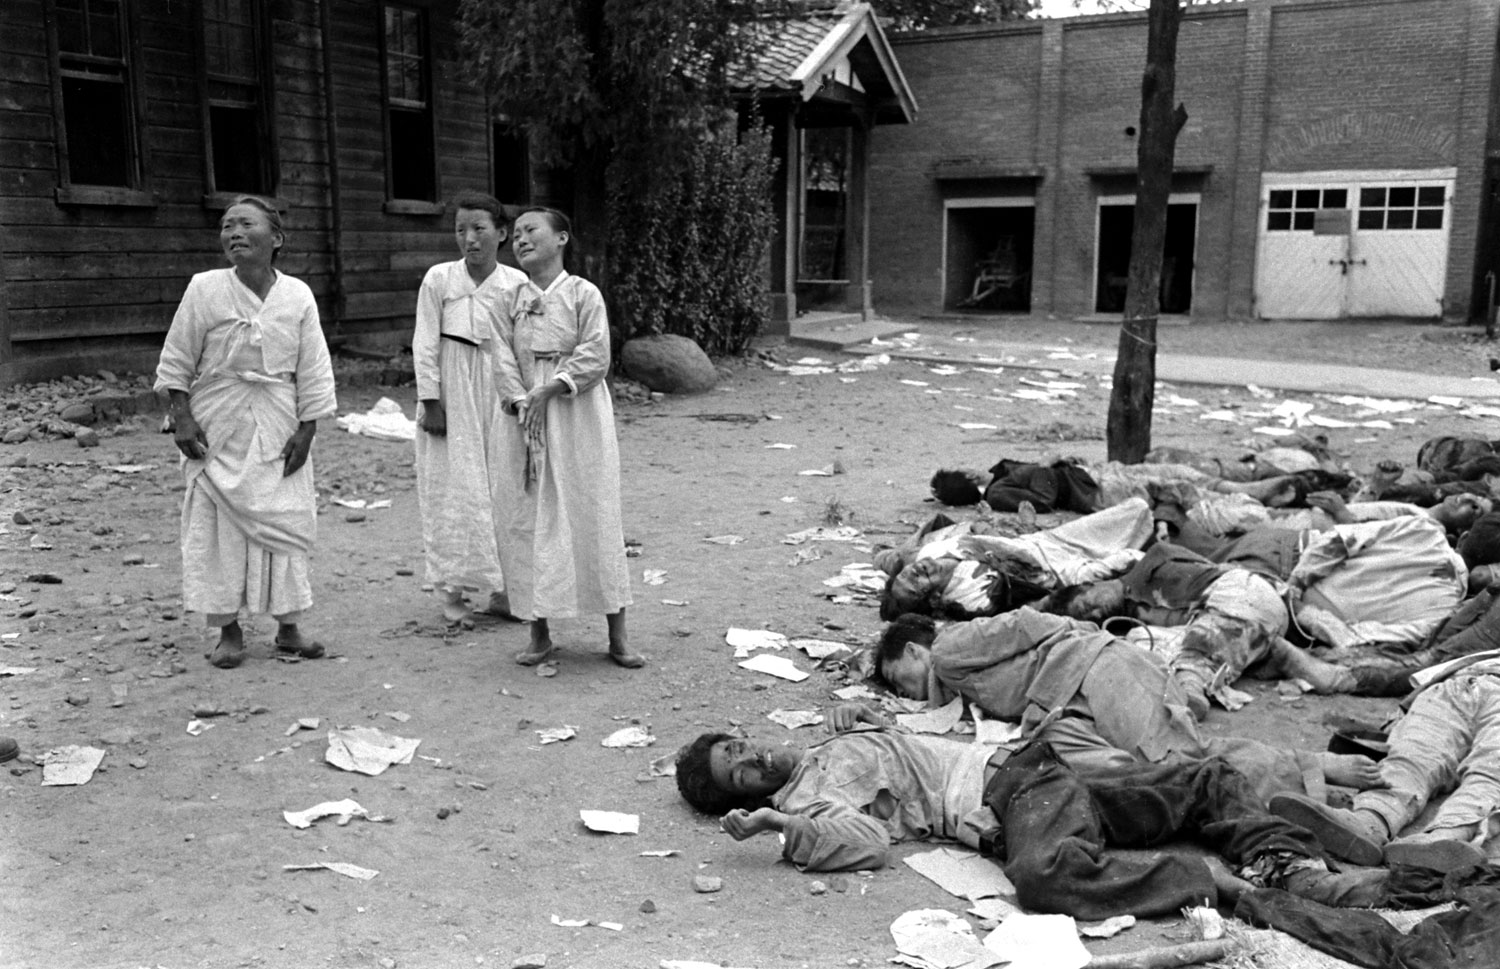 Grieving women and civilians killed by communist rebels during the 1948 Yeosu-Suncheon Rebellion.